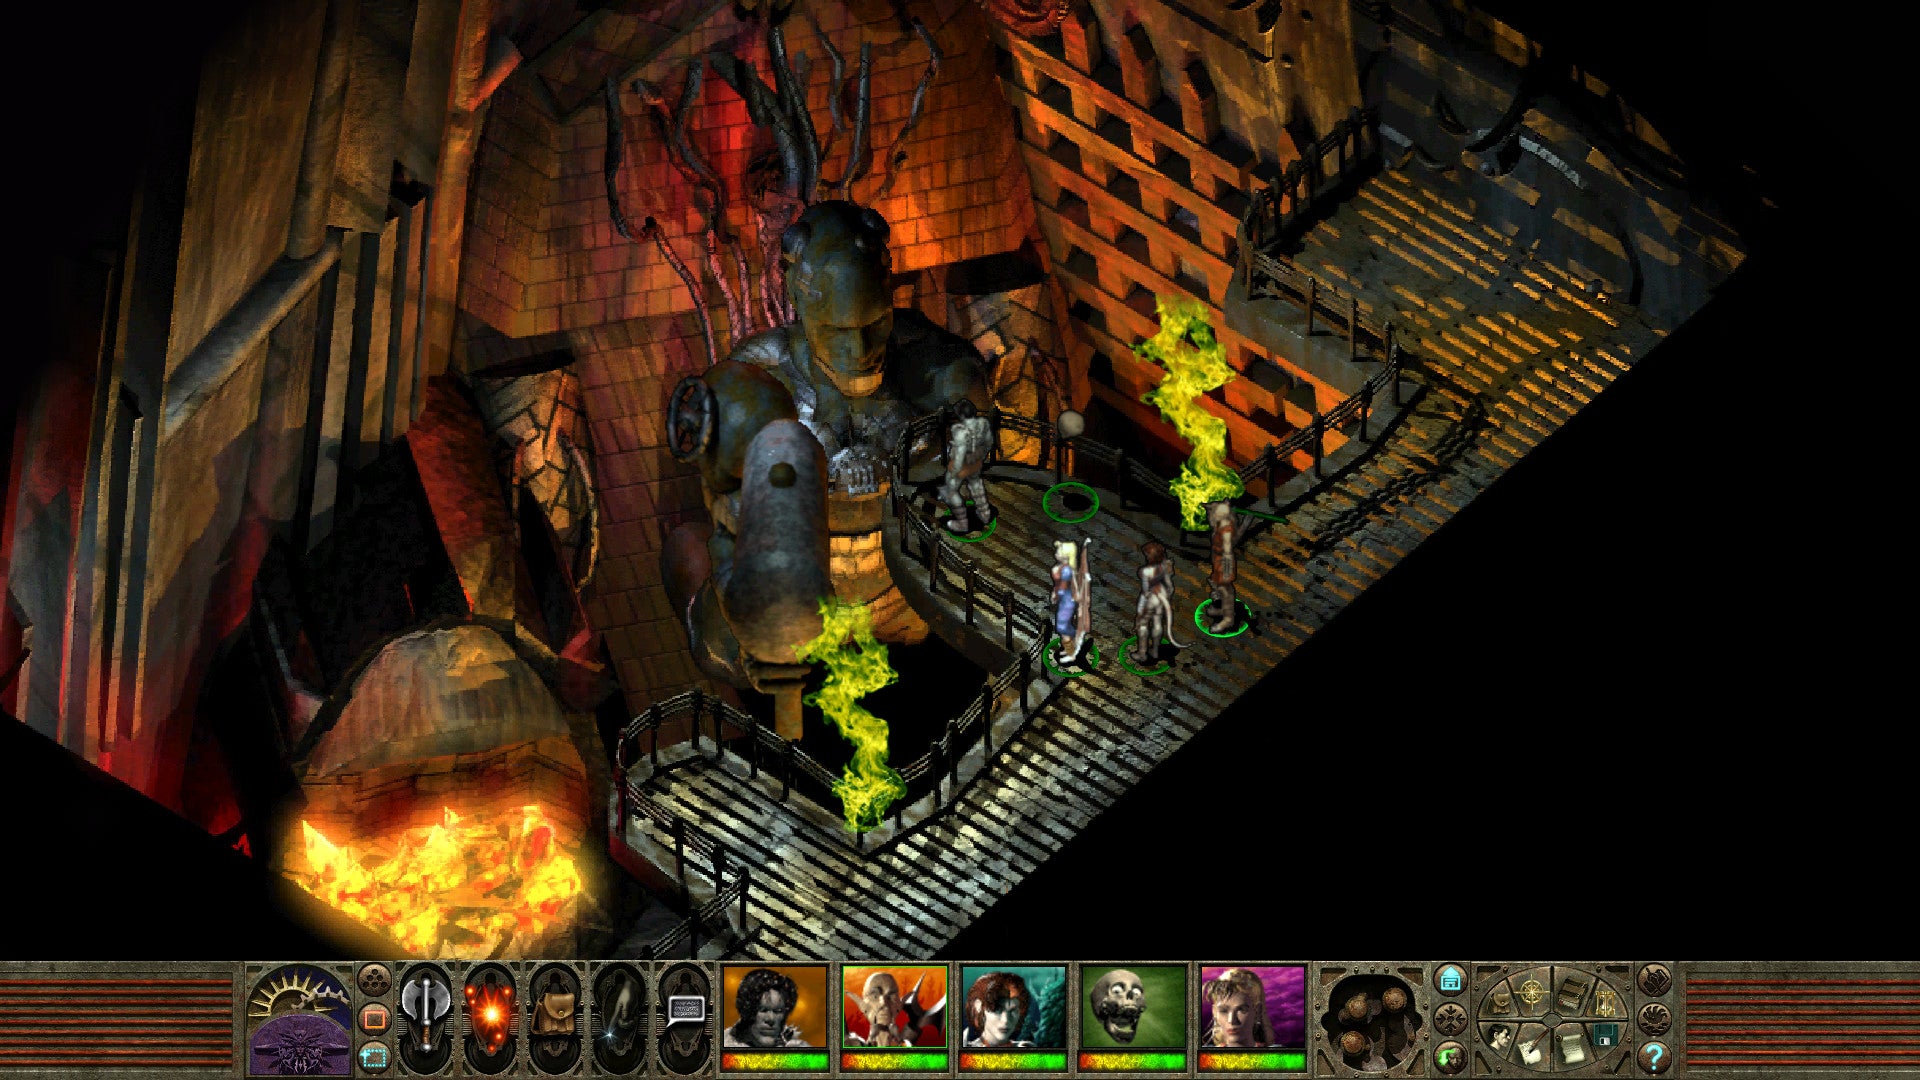 Warriors stand in front of a large statue in Planescape Torment